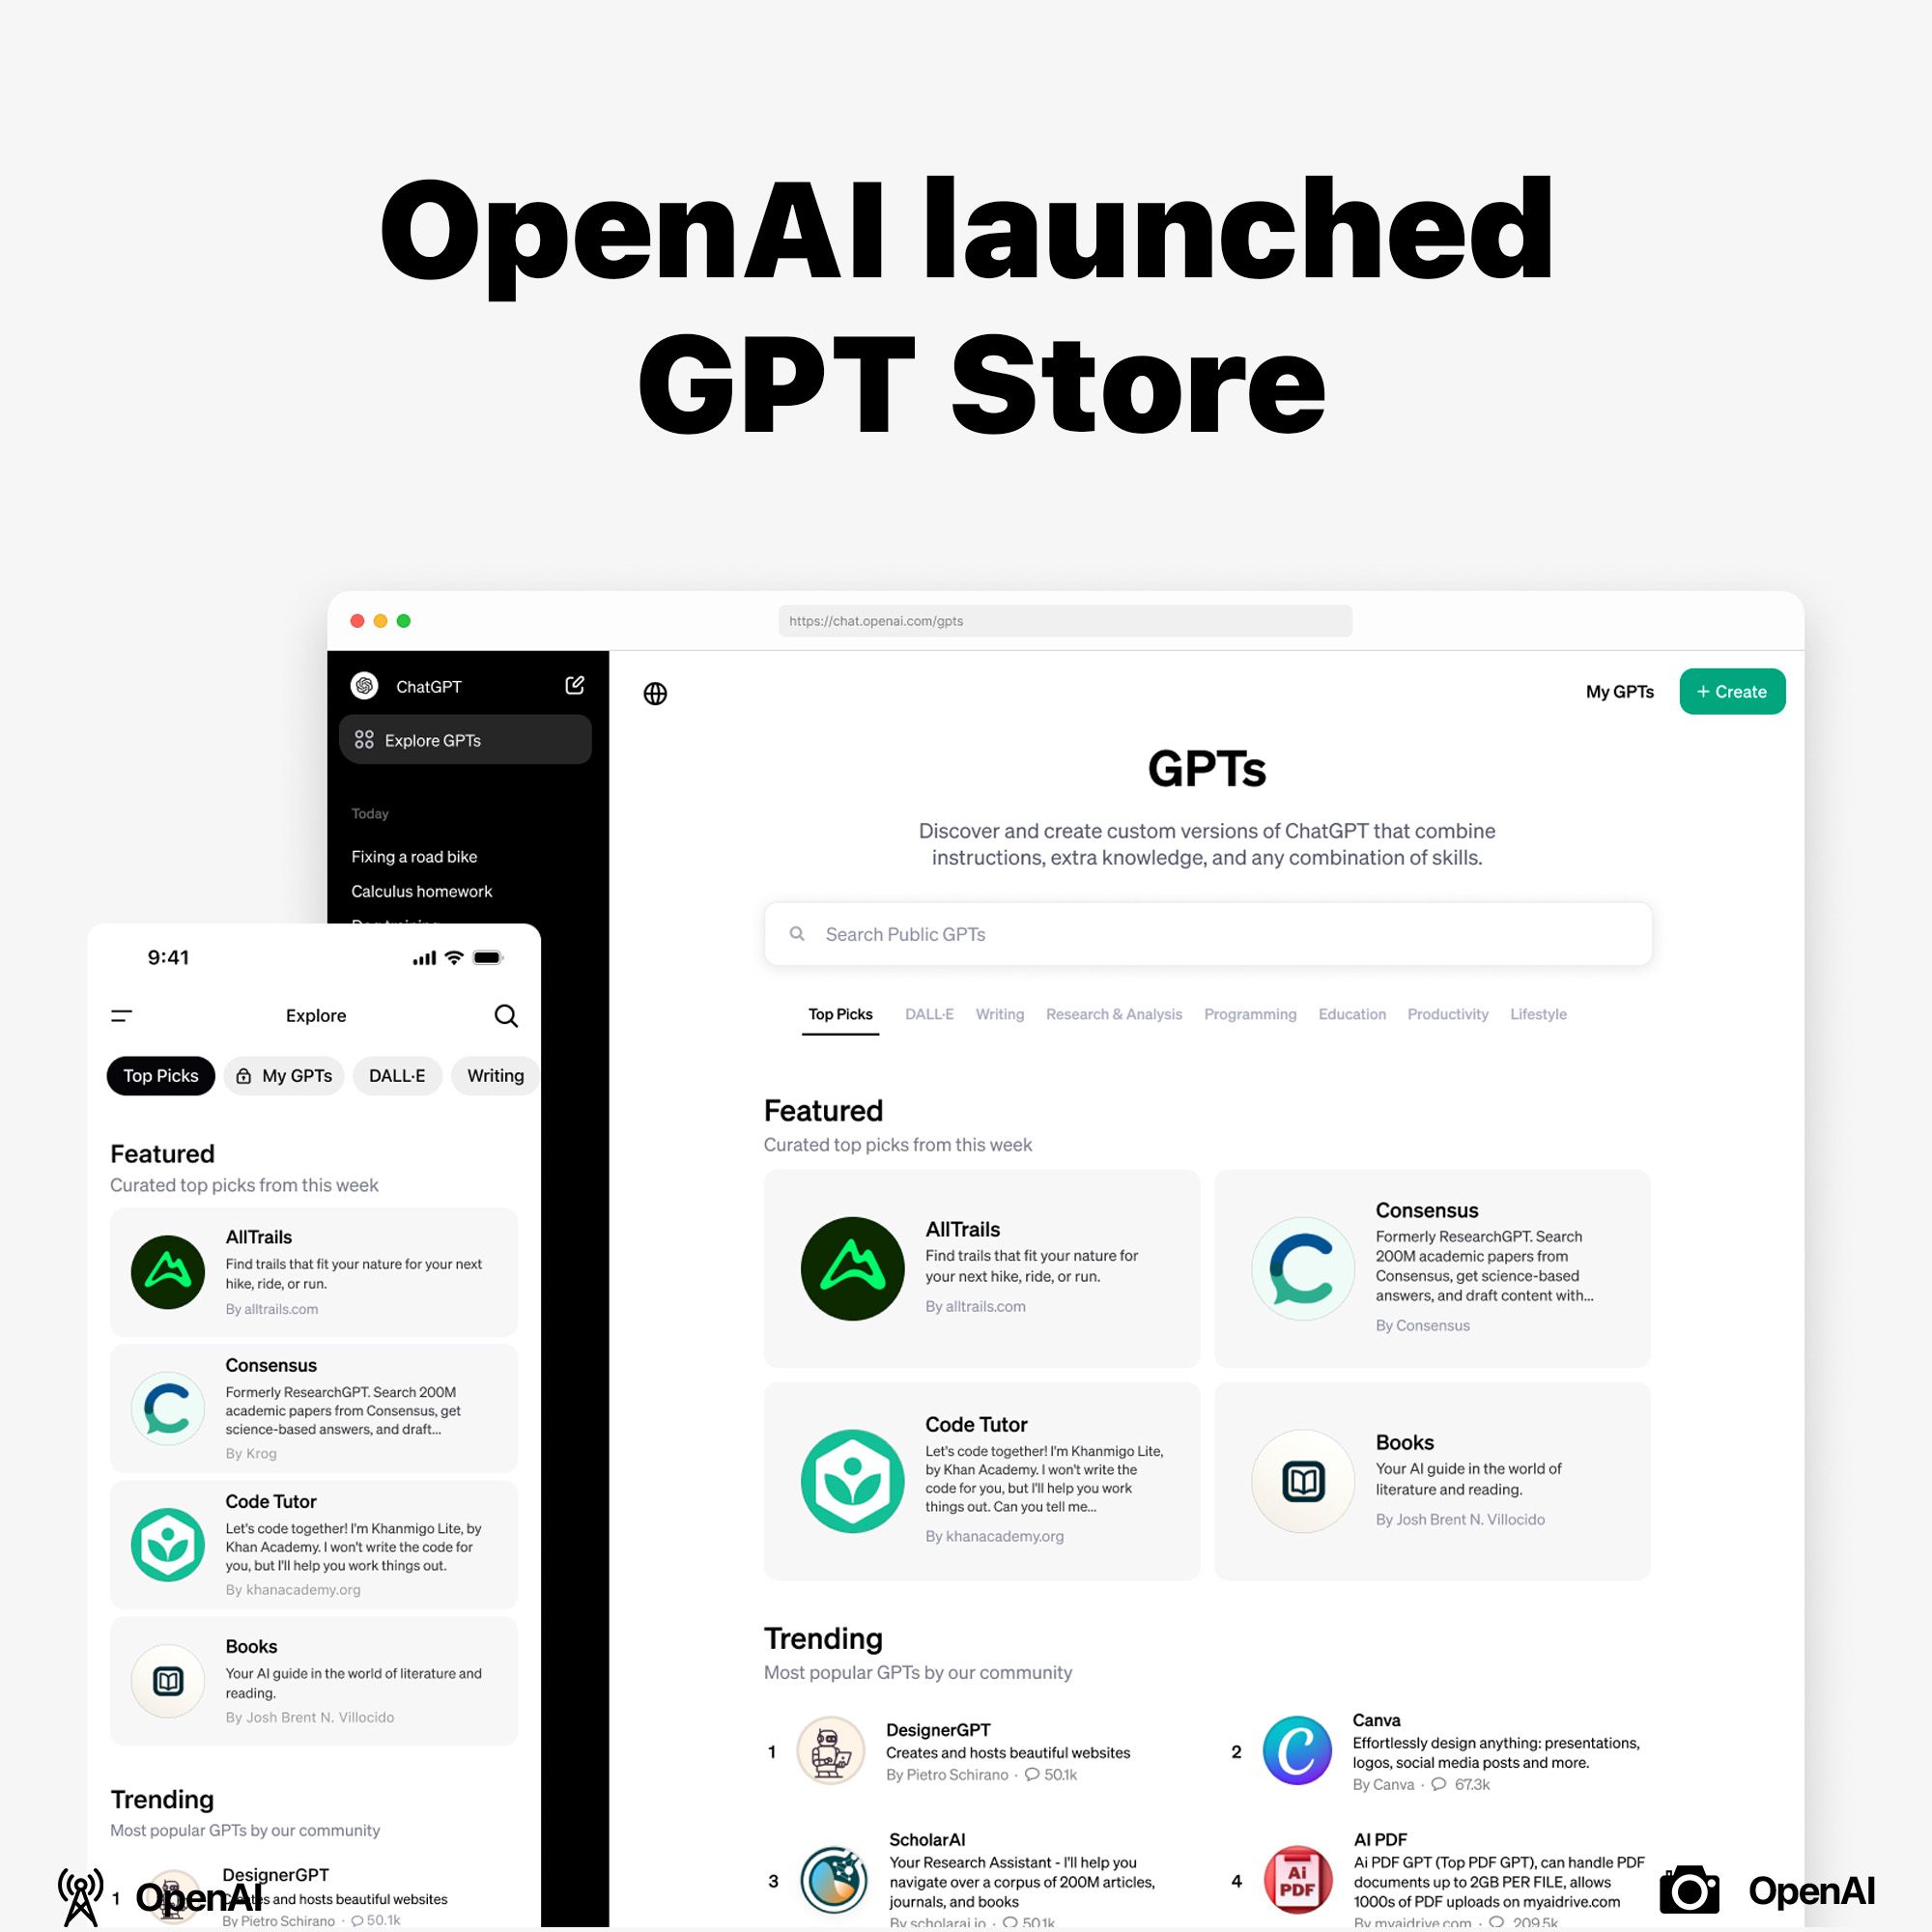 GPT Store is launched